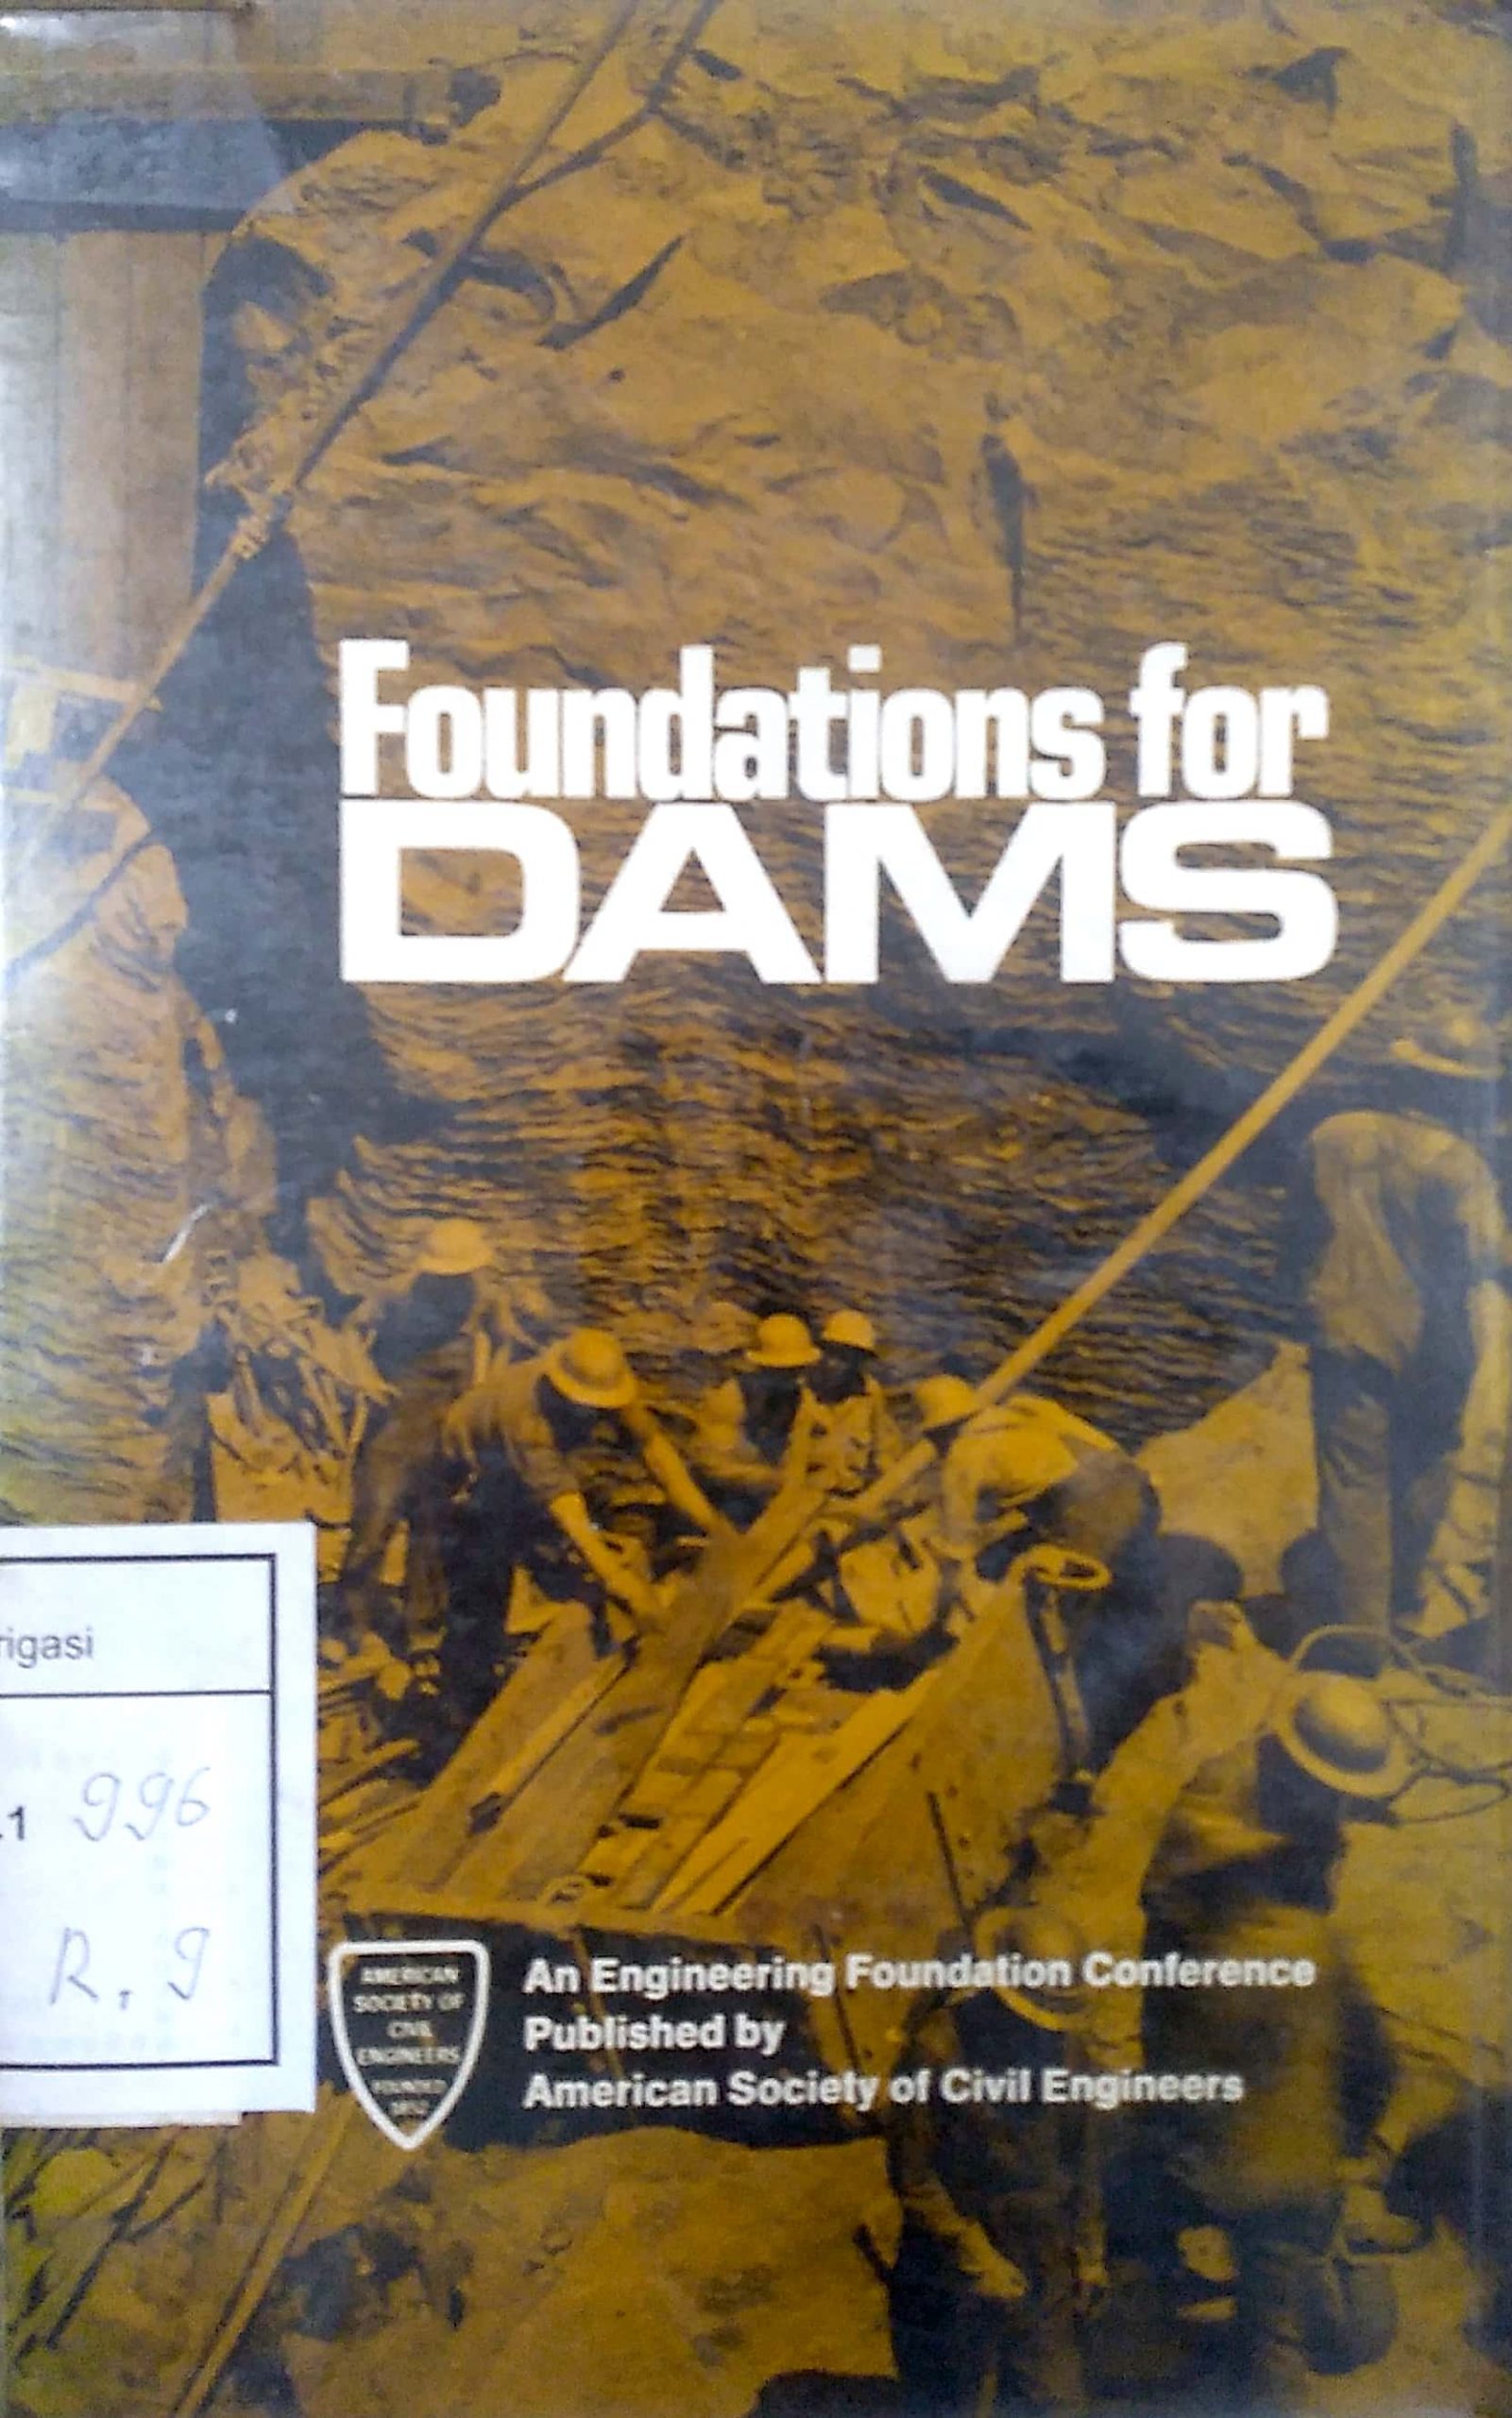 FOUNDATION FOR DAMS